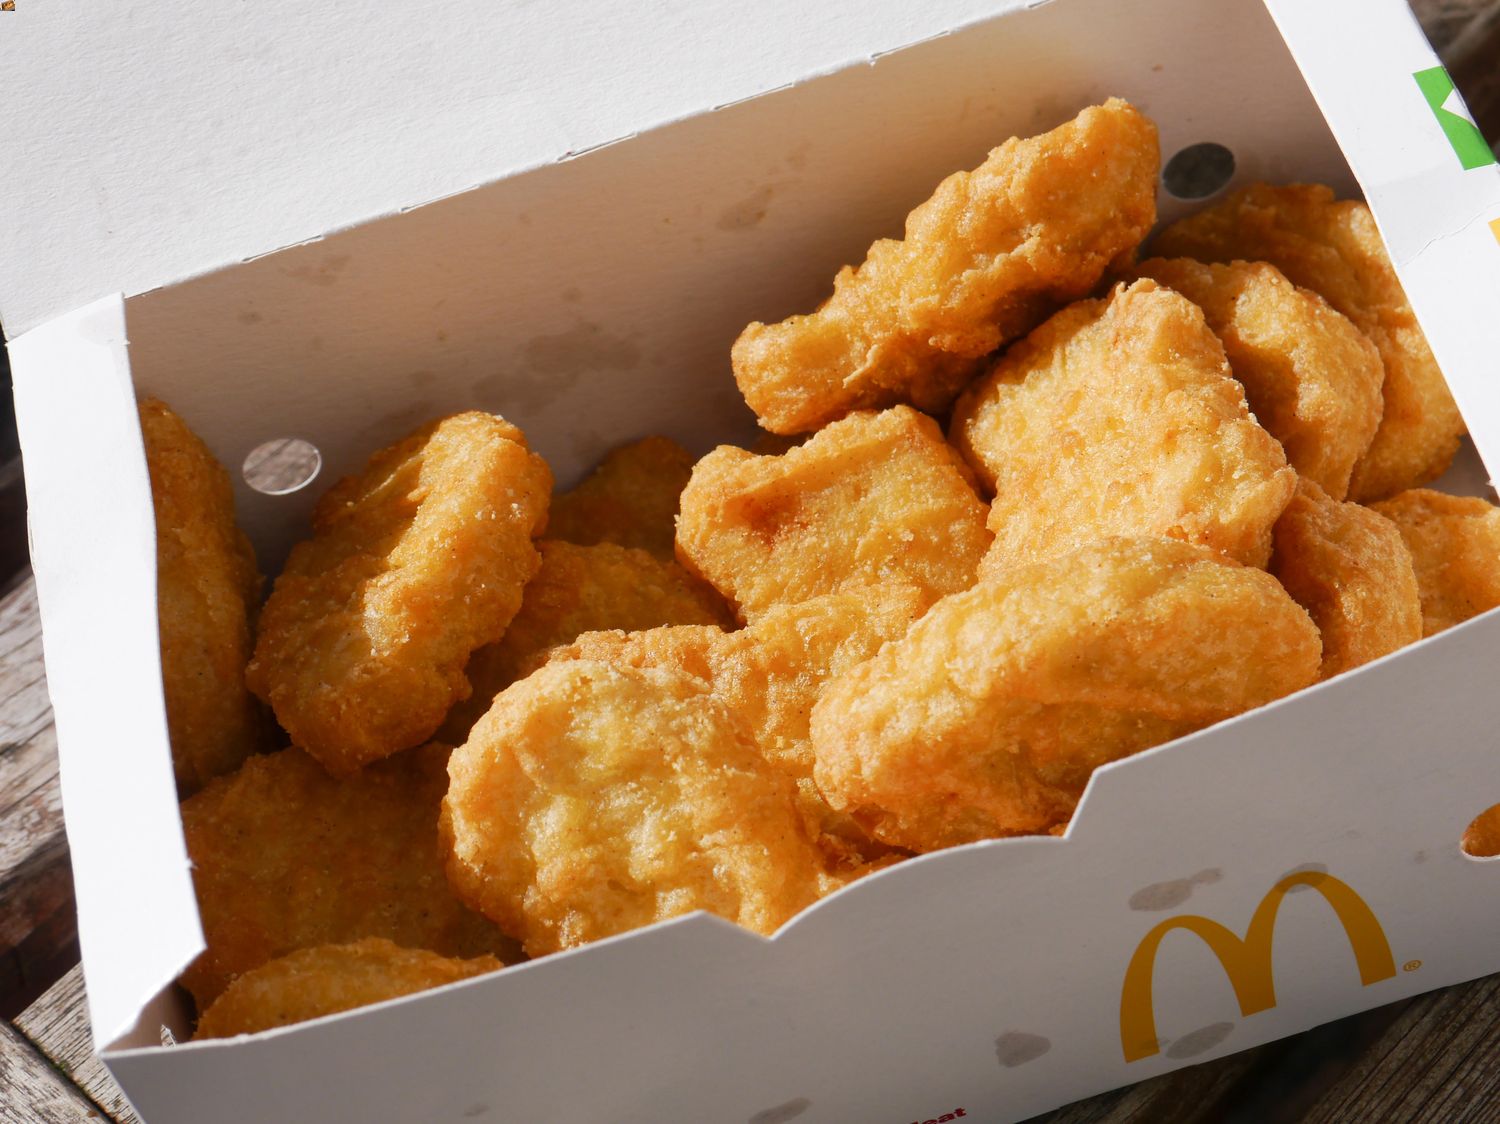 what-is-mcdonalds-chicken-nuggets-made-of-1708321542-17206983559342042479359-1720713458699-1720713458869293261034.jpg